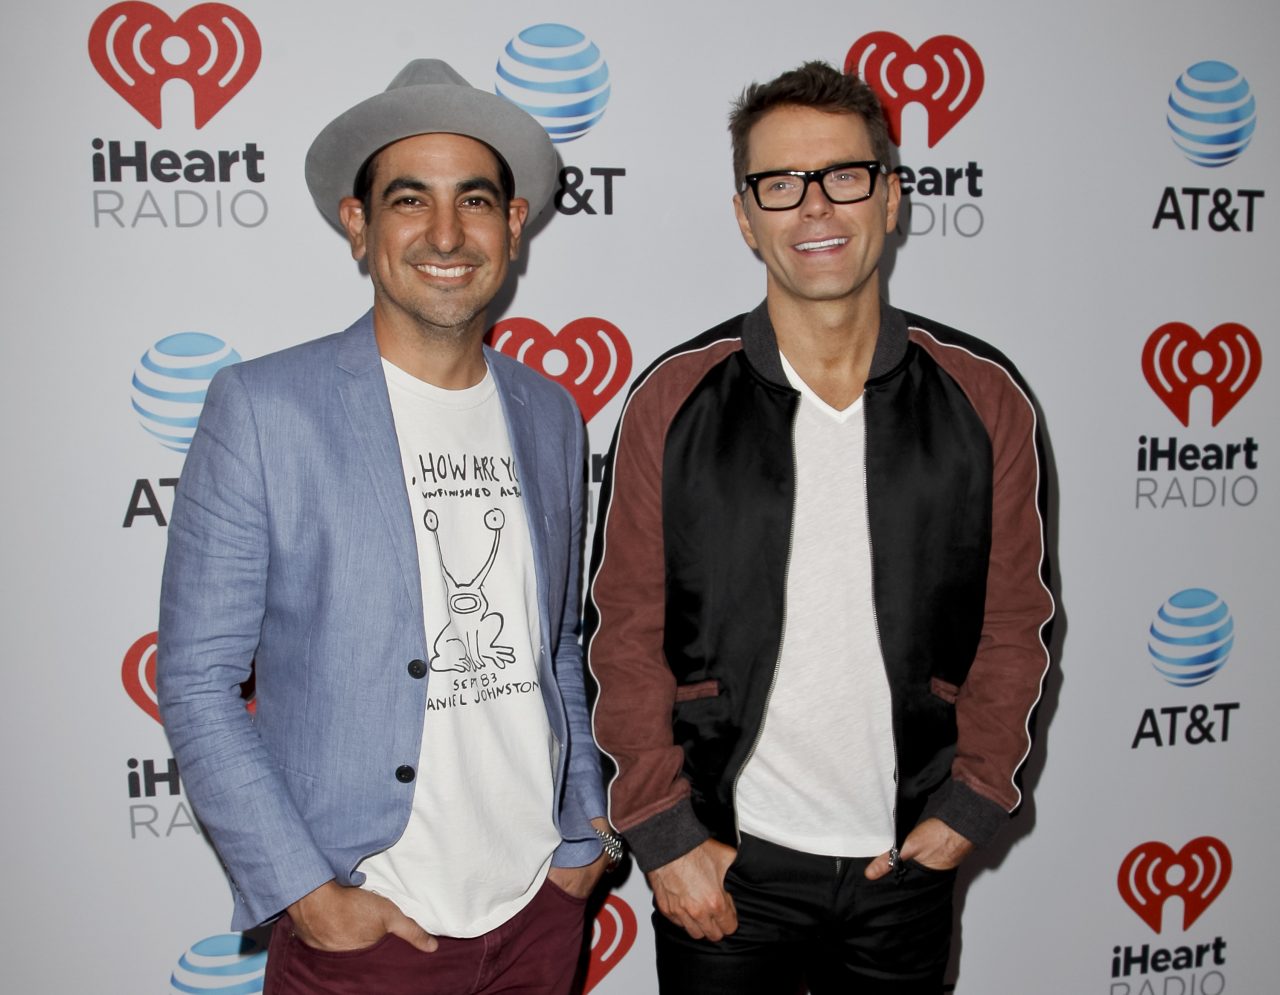 BobbyCast Recap: Bobby Bones And Eddie Talk About Famous Songs With Misunderstood Meanings